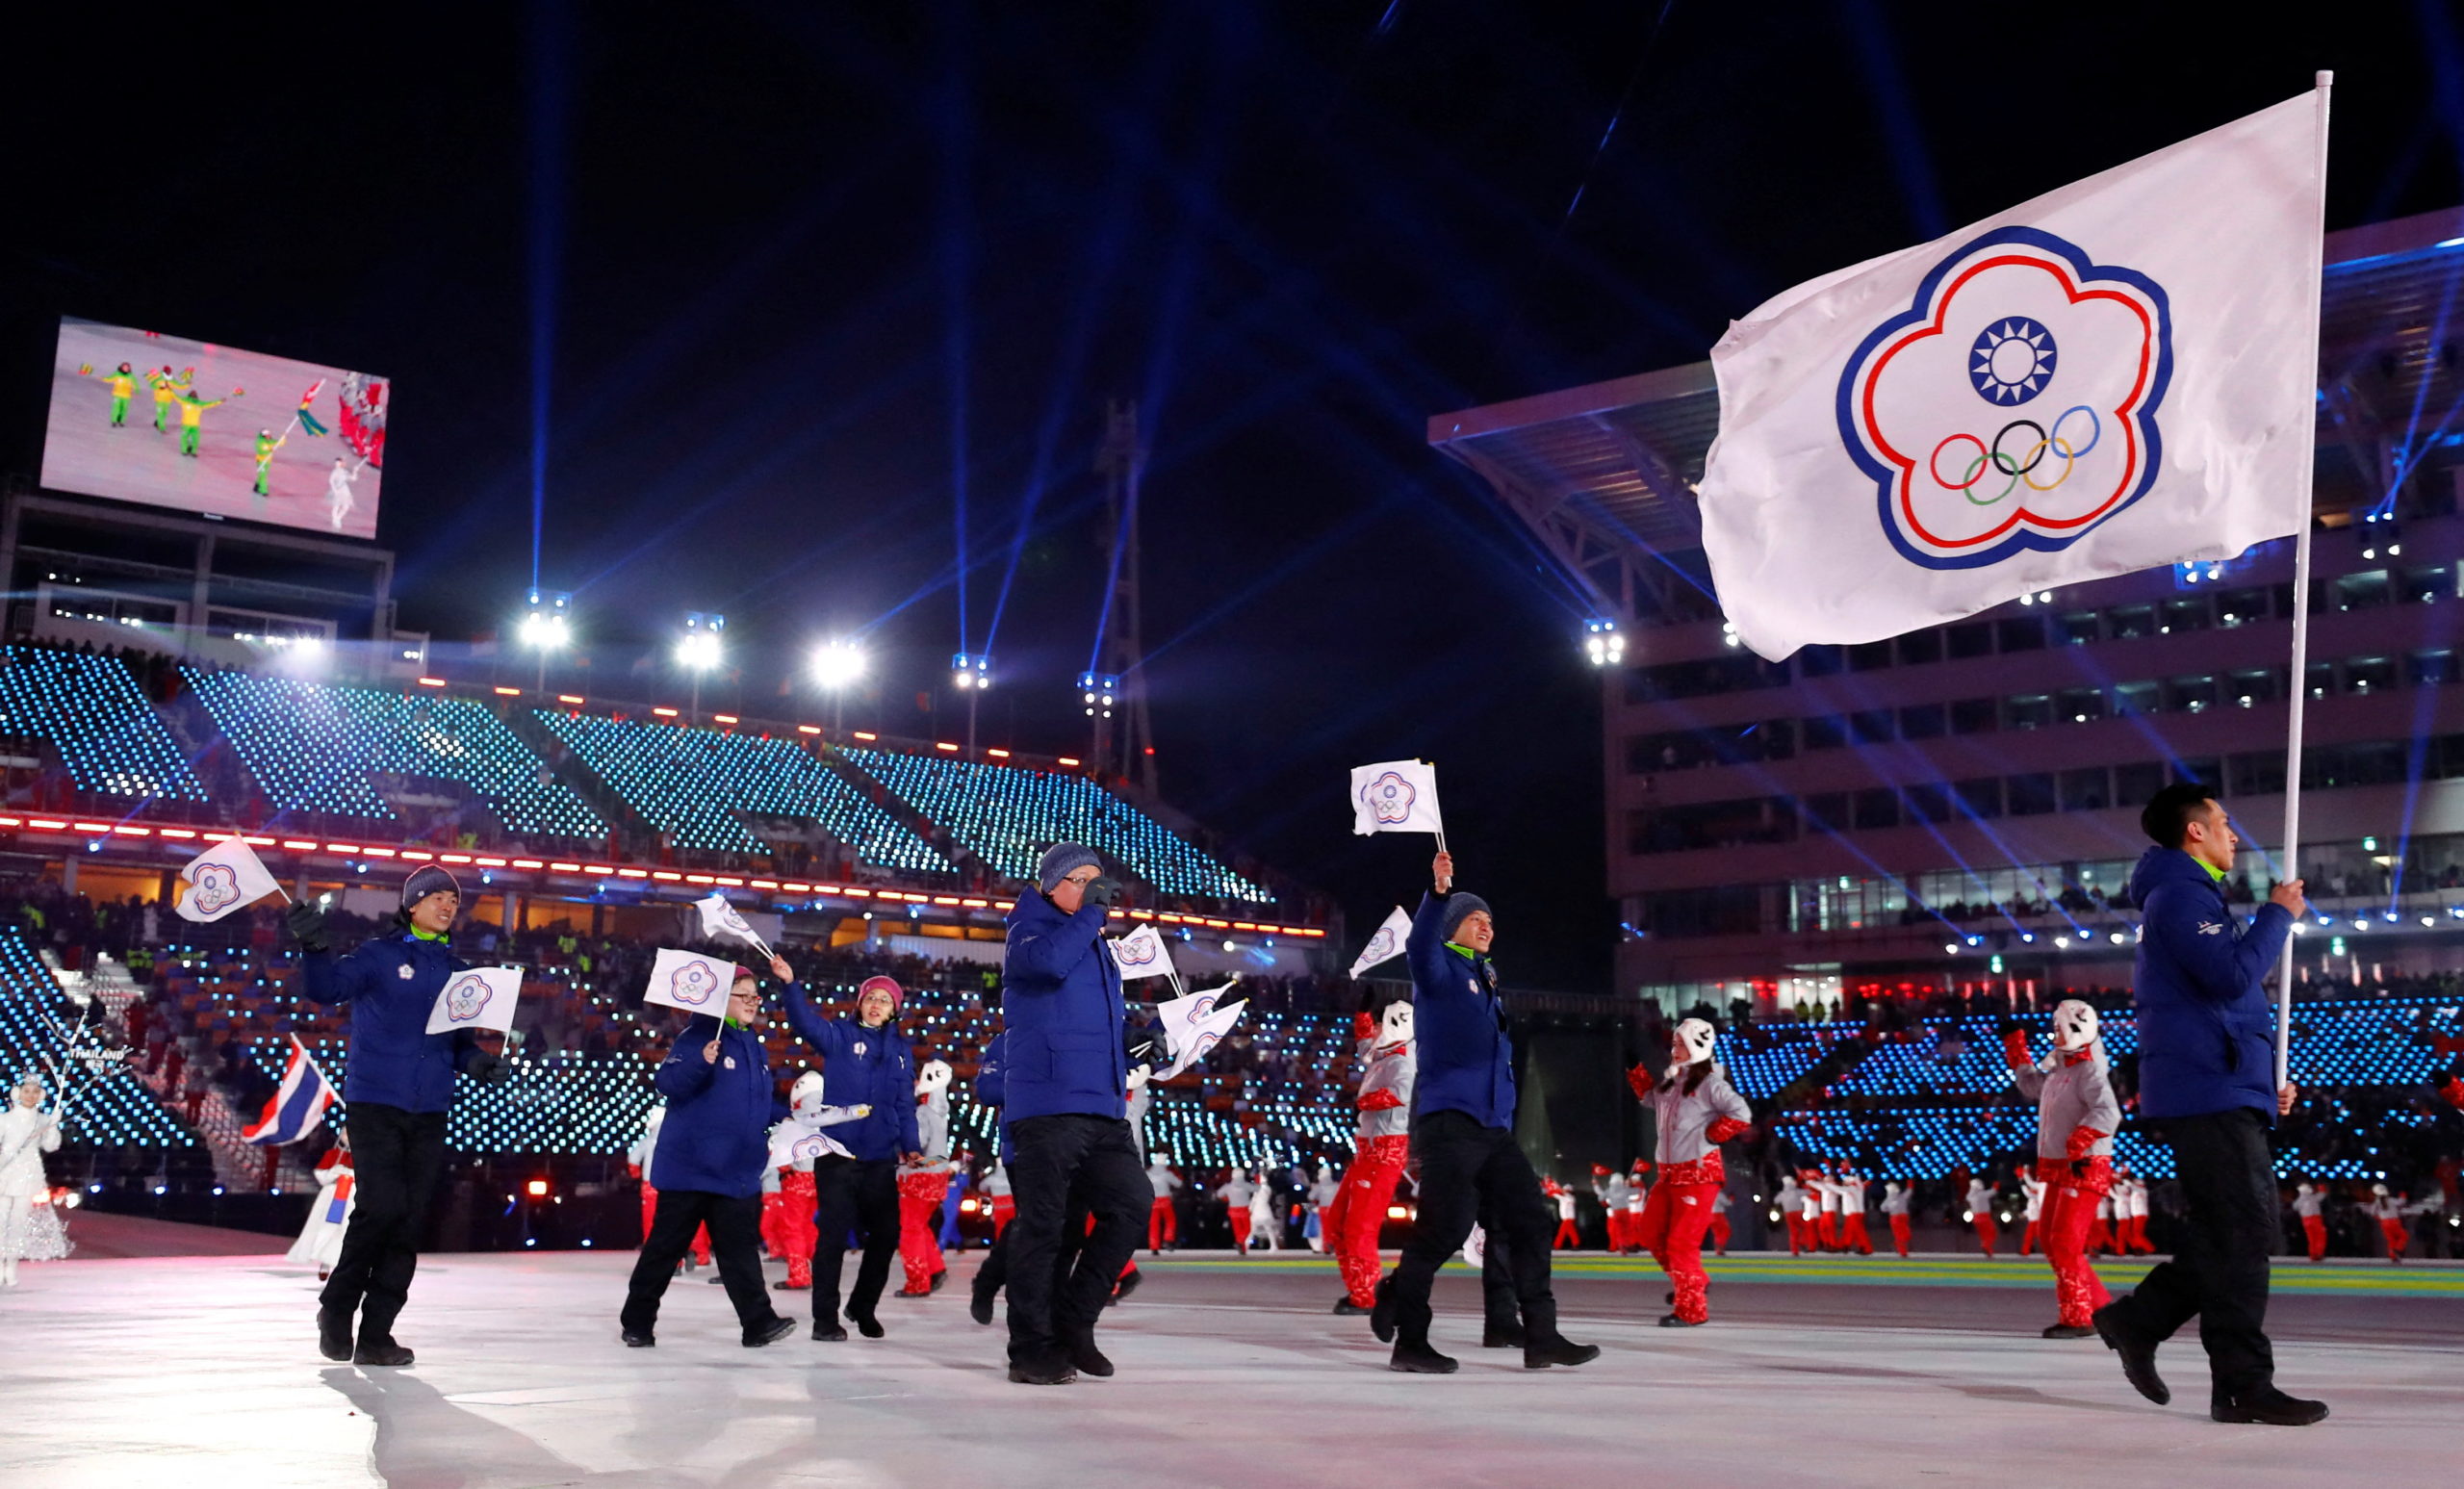 – February 9, 2018 -  Te-An Lien of Taiwan carries the national flag during the opening ceremony. 